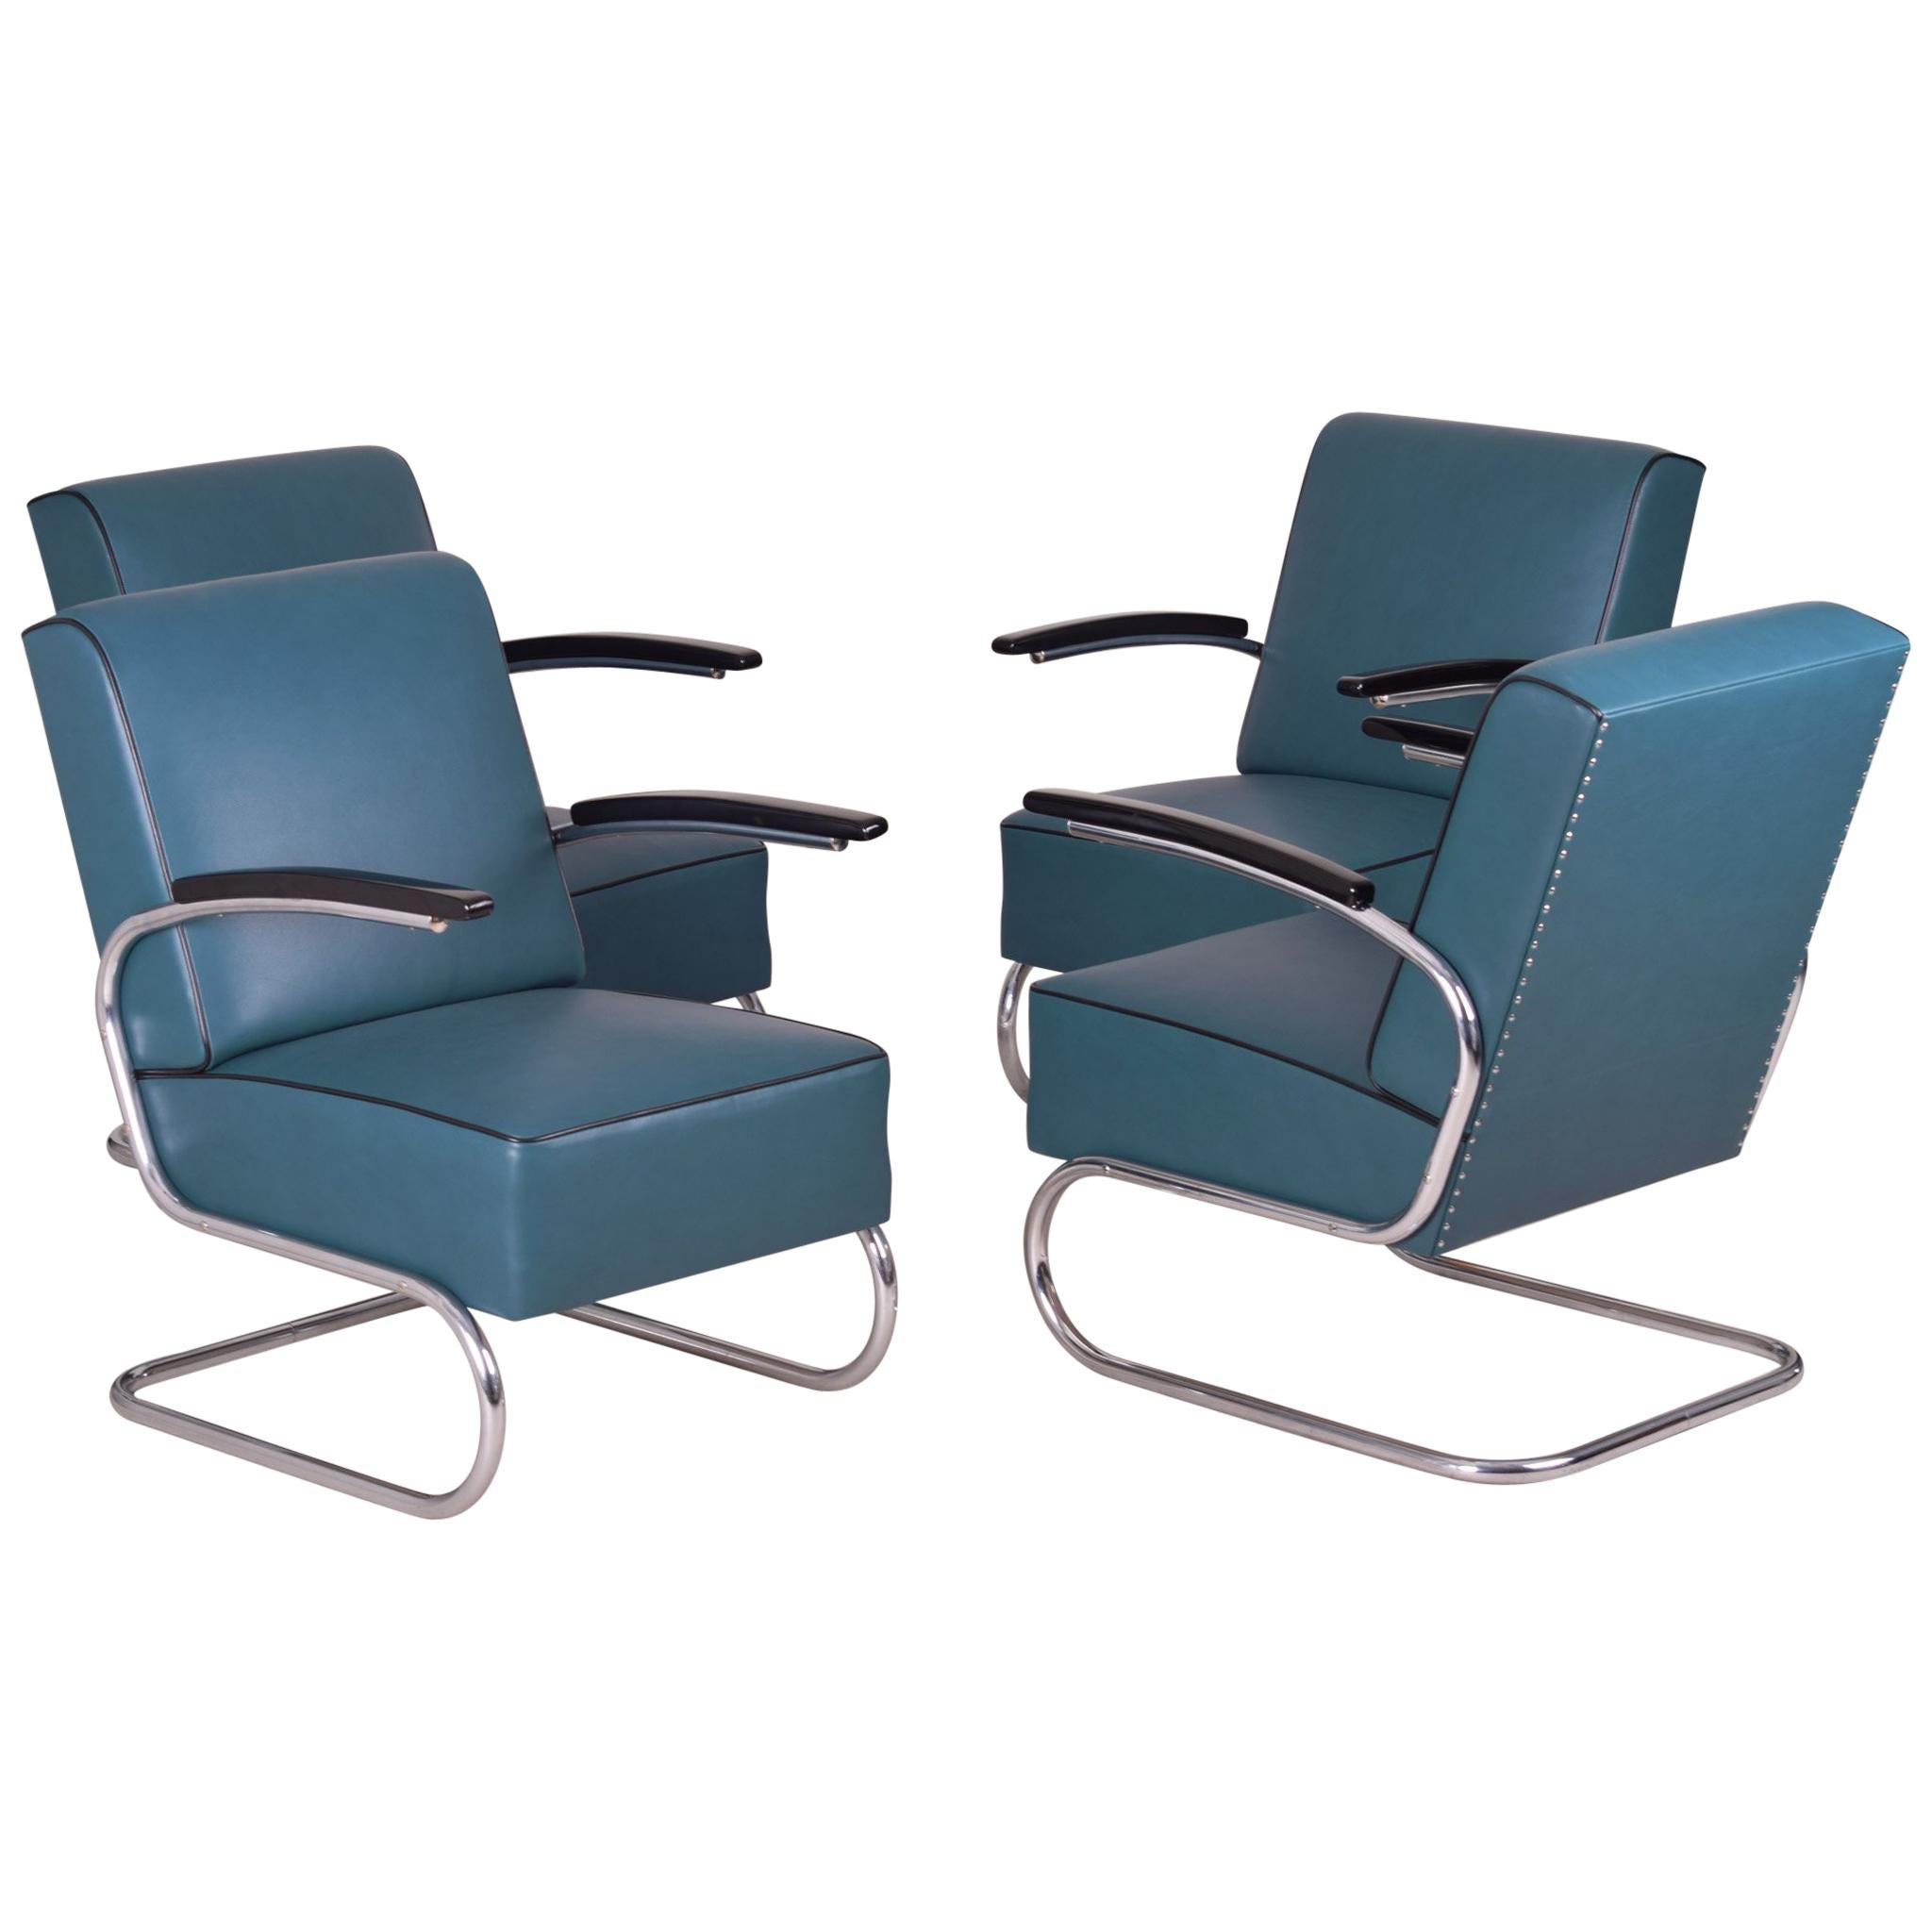 4 Tubular Steel Cantilever Armchairs in Art Deco, Chrome, New Blue Leather For Sale